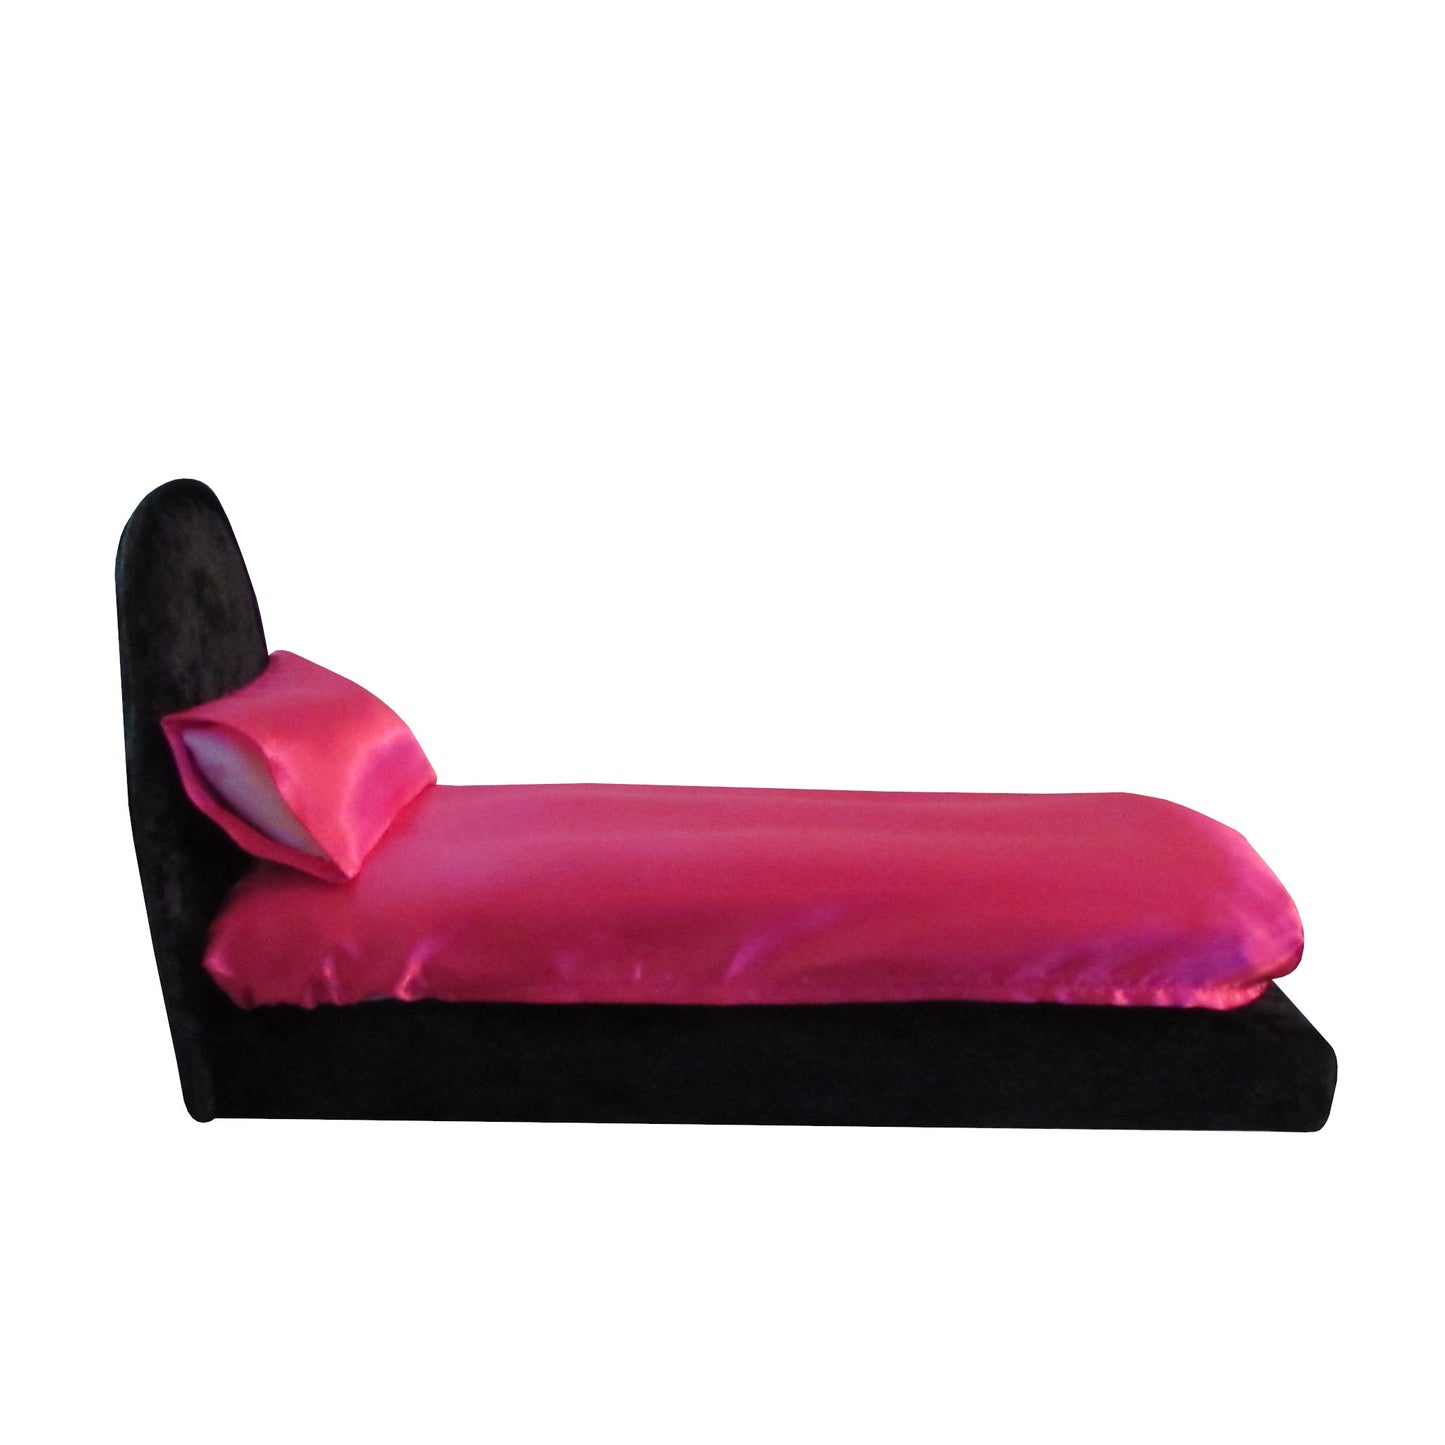 Magenta Satin Fitted Sheet and Pillowcase with Black Crushed Velvet Doll Bed for 11.5-inch and 12-inch dolls Side view